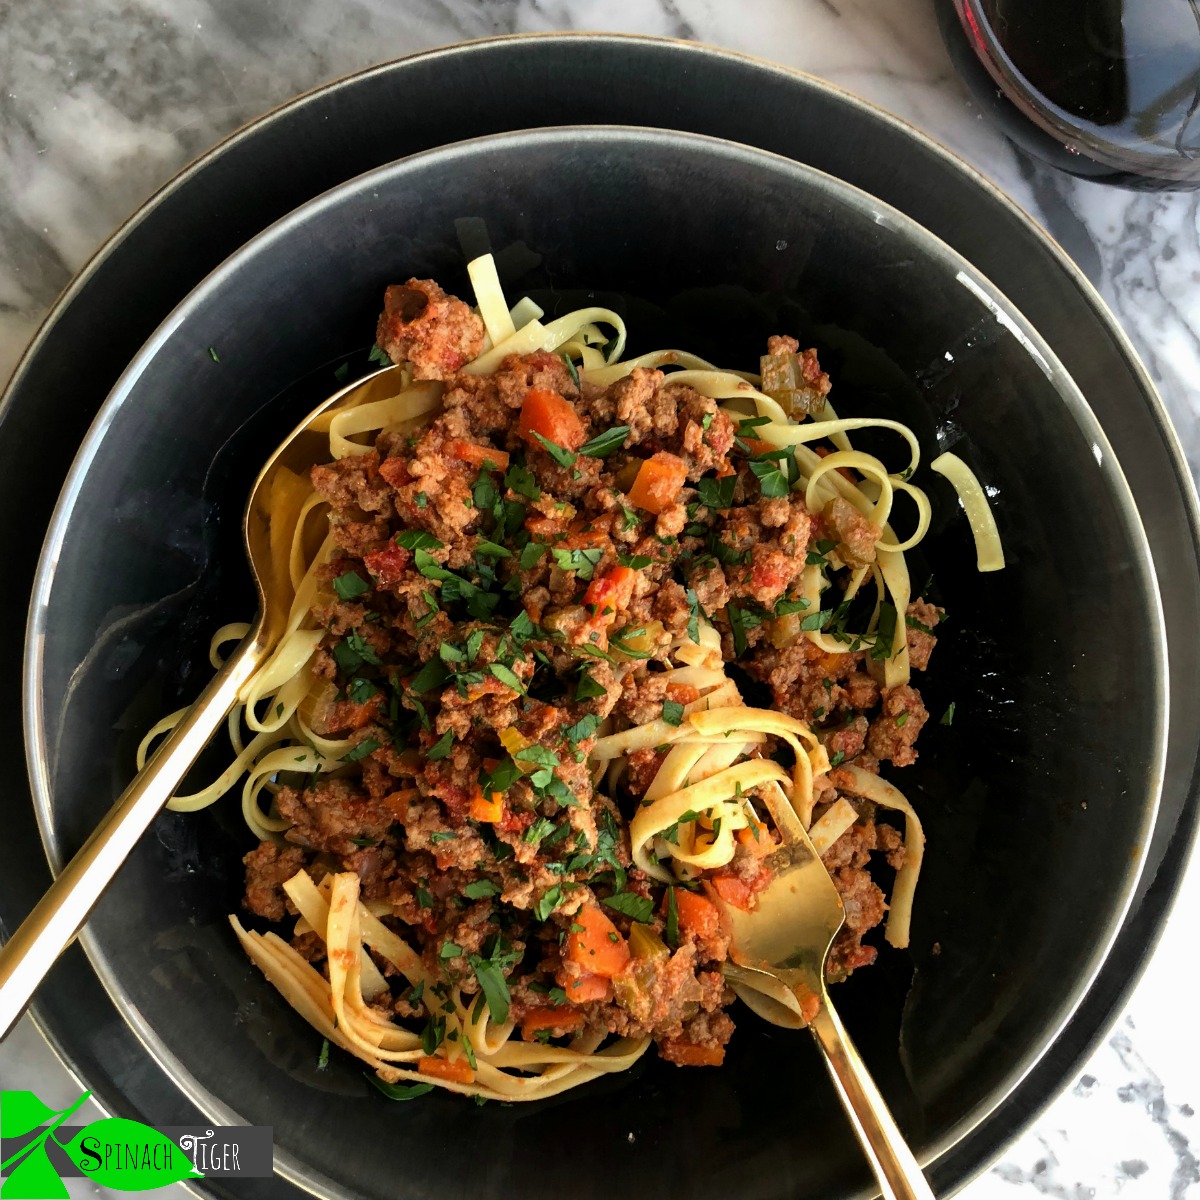 How to Make Marcella Hazan's Bolognese Sauce from Spinach Tiger